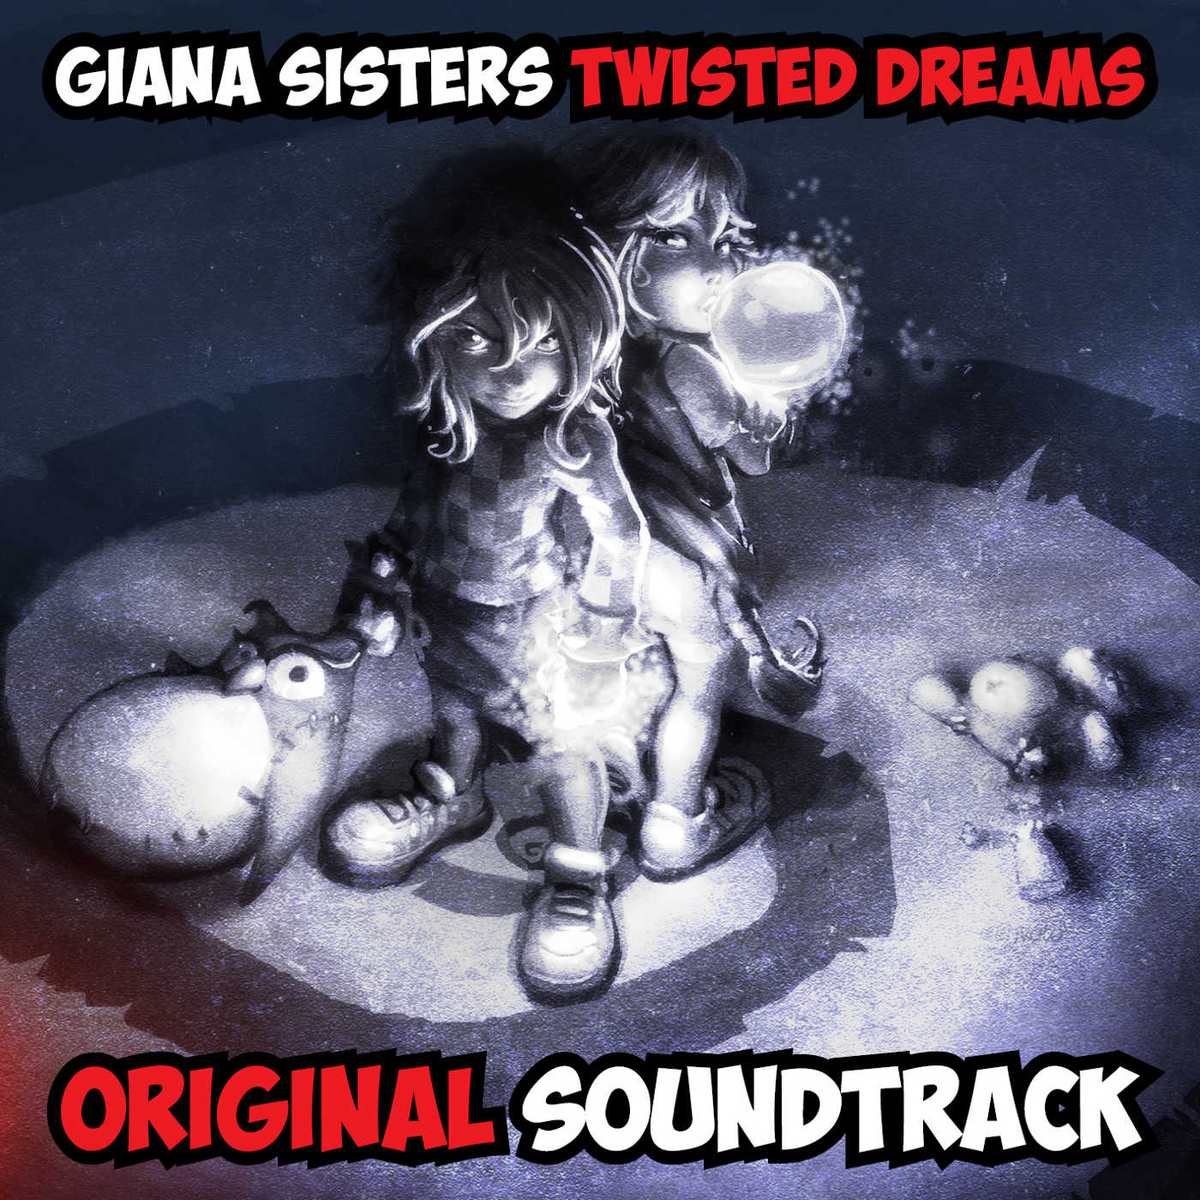 Giana_Sisters_Twisted_Dreams_Original_Soundtrack__cover1200x1200.jpg